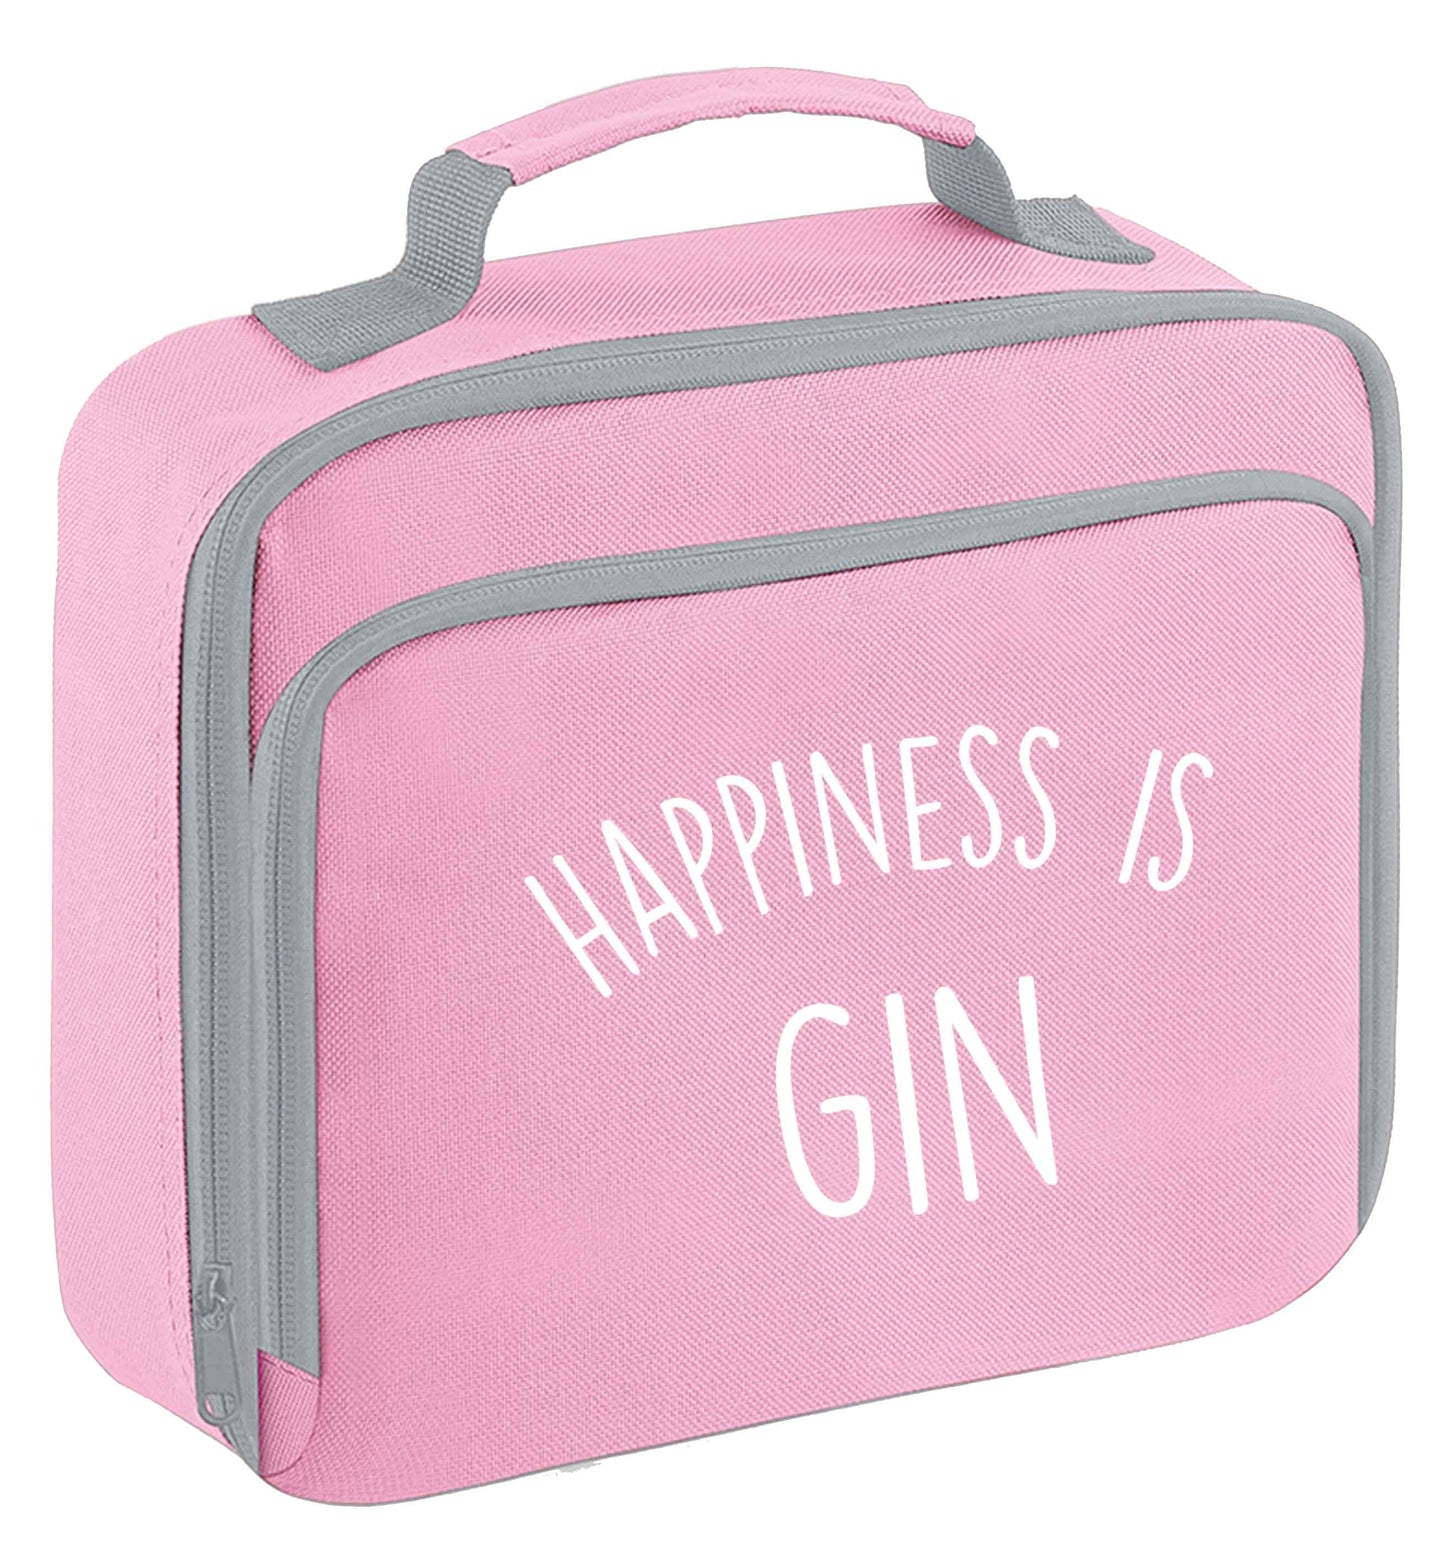 Happiness is gin insulated pink lunch bag cooler